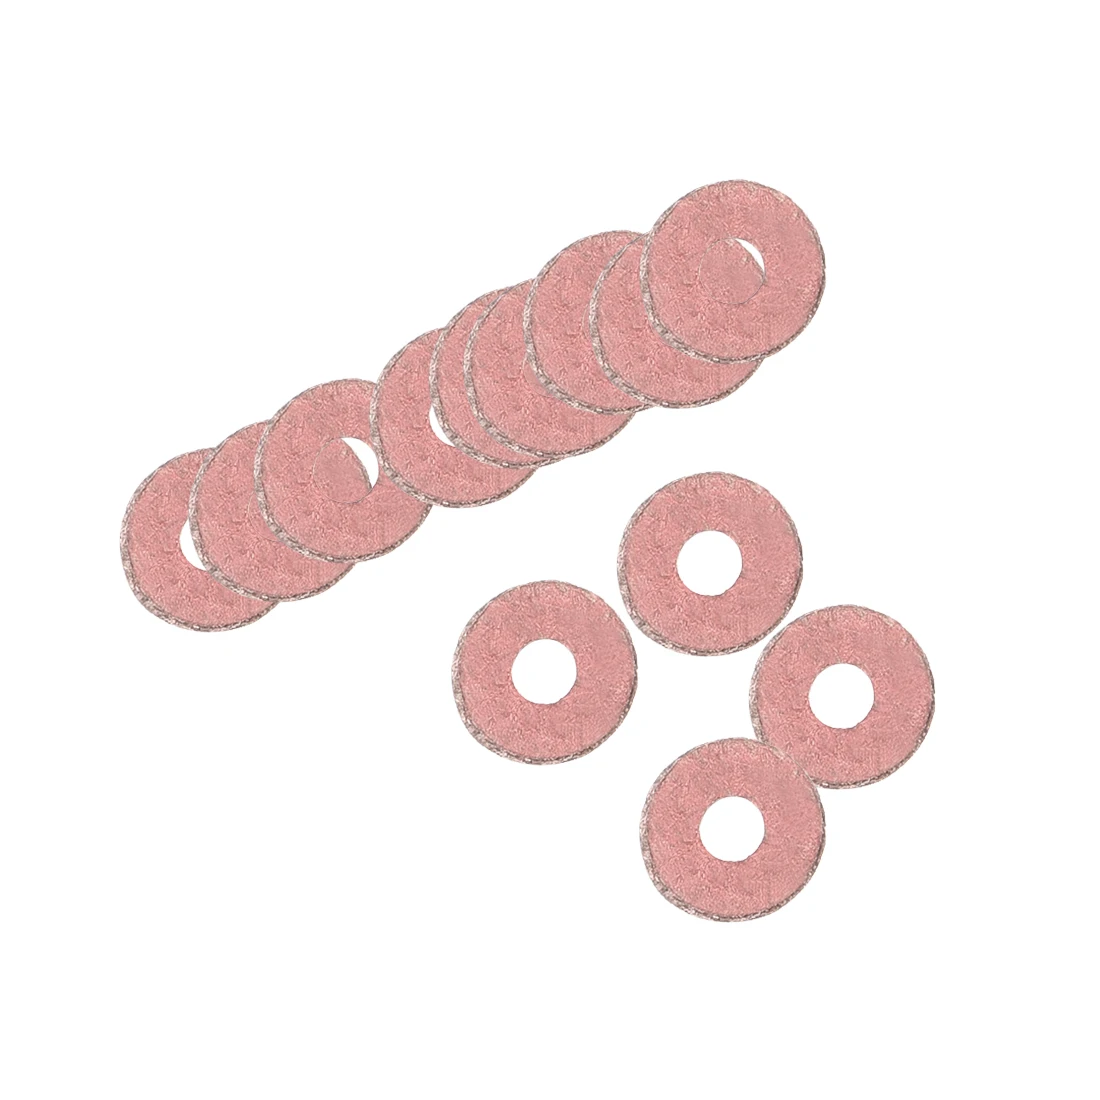 

uxcell Insulating Washer, 500Pcs 2 x 6 x 0.8mm Red Vulcanized Fiber Washer, Insulation Gasket for Motherboard